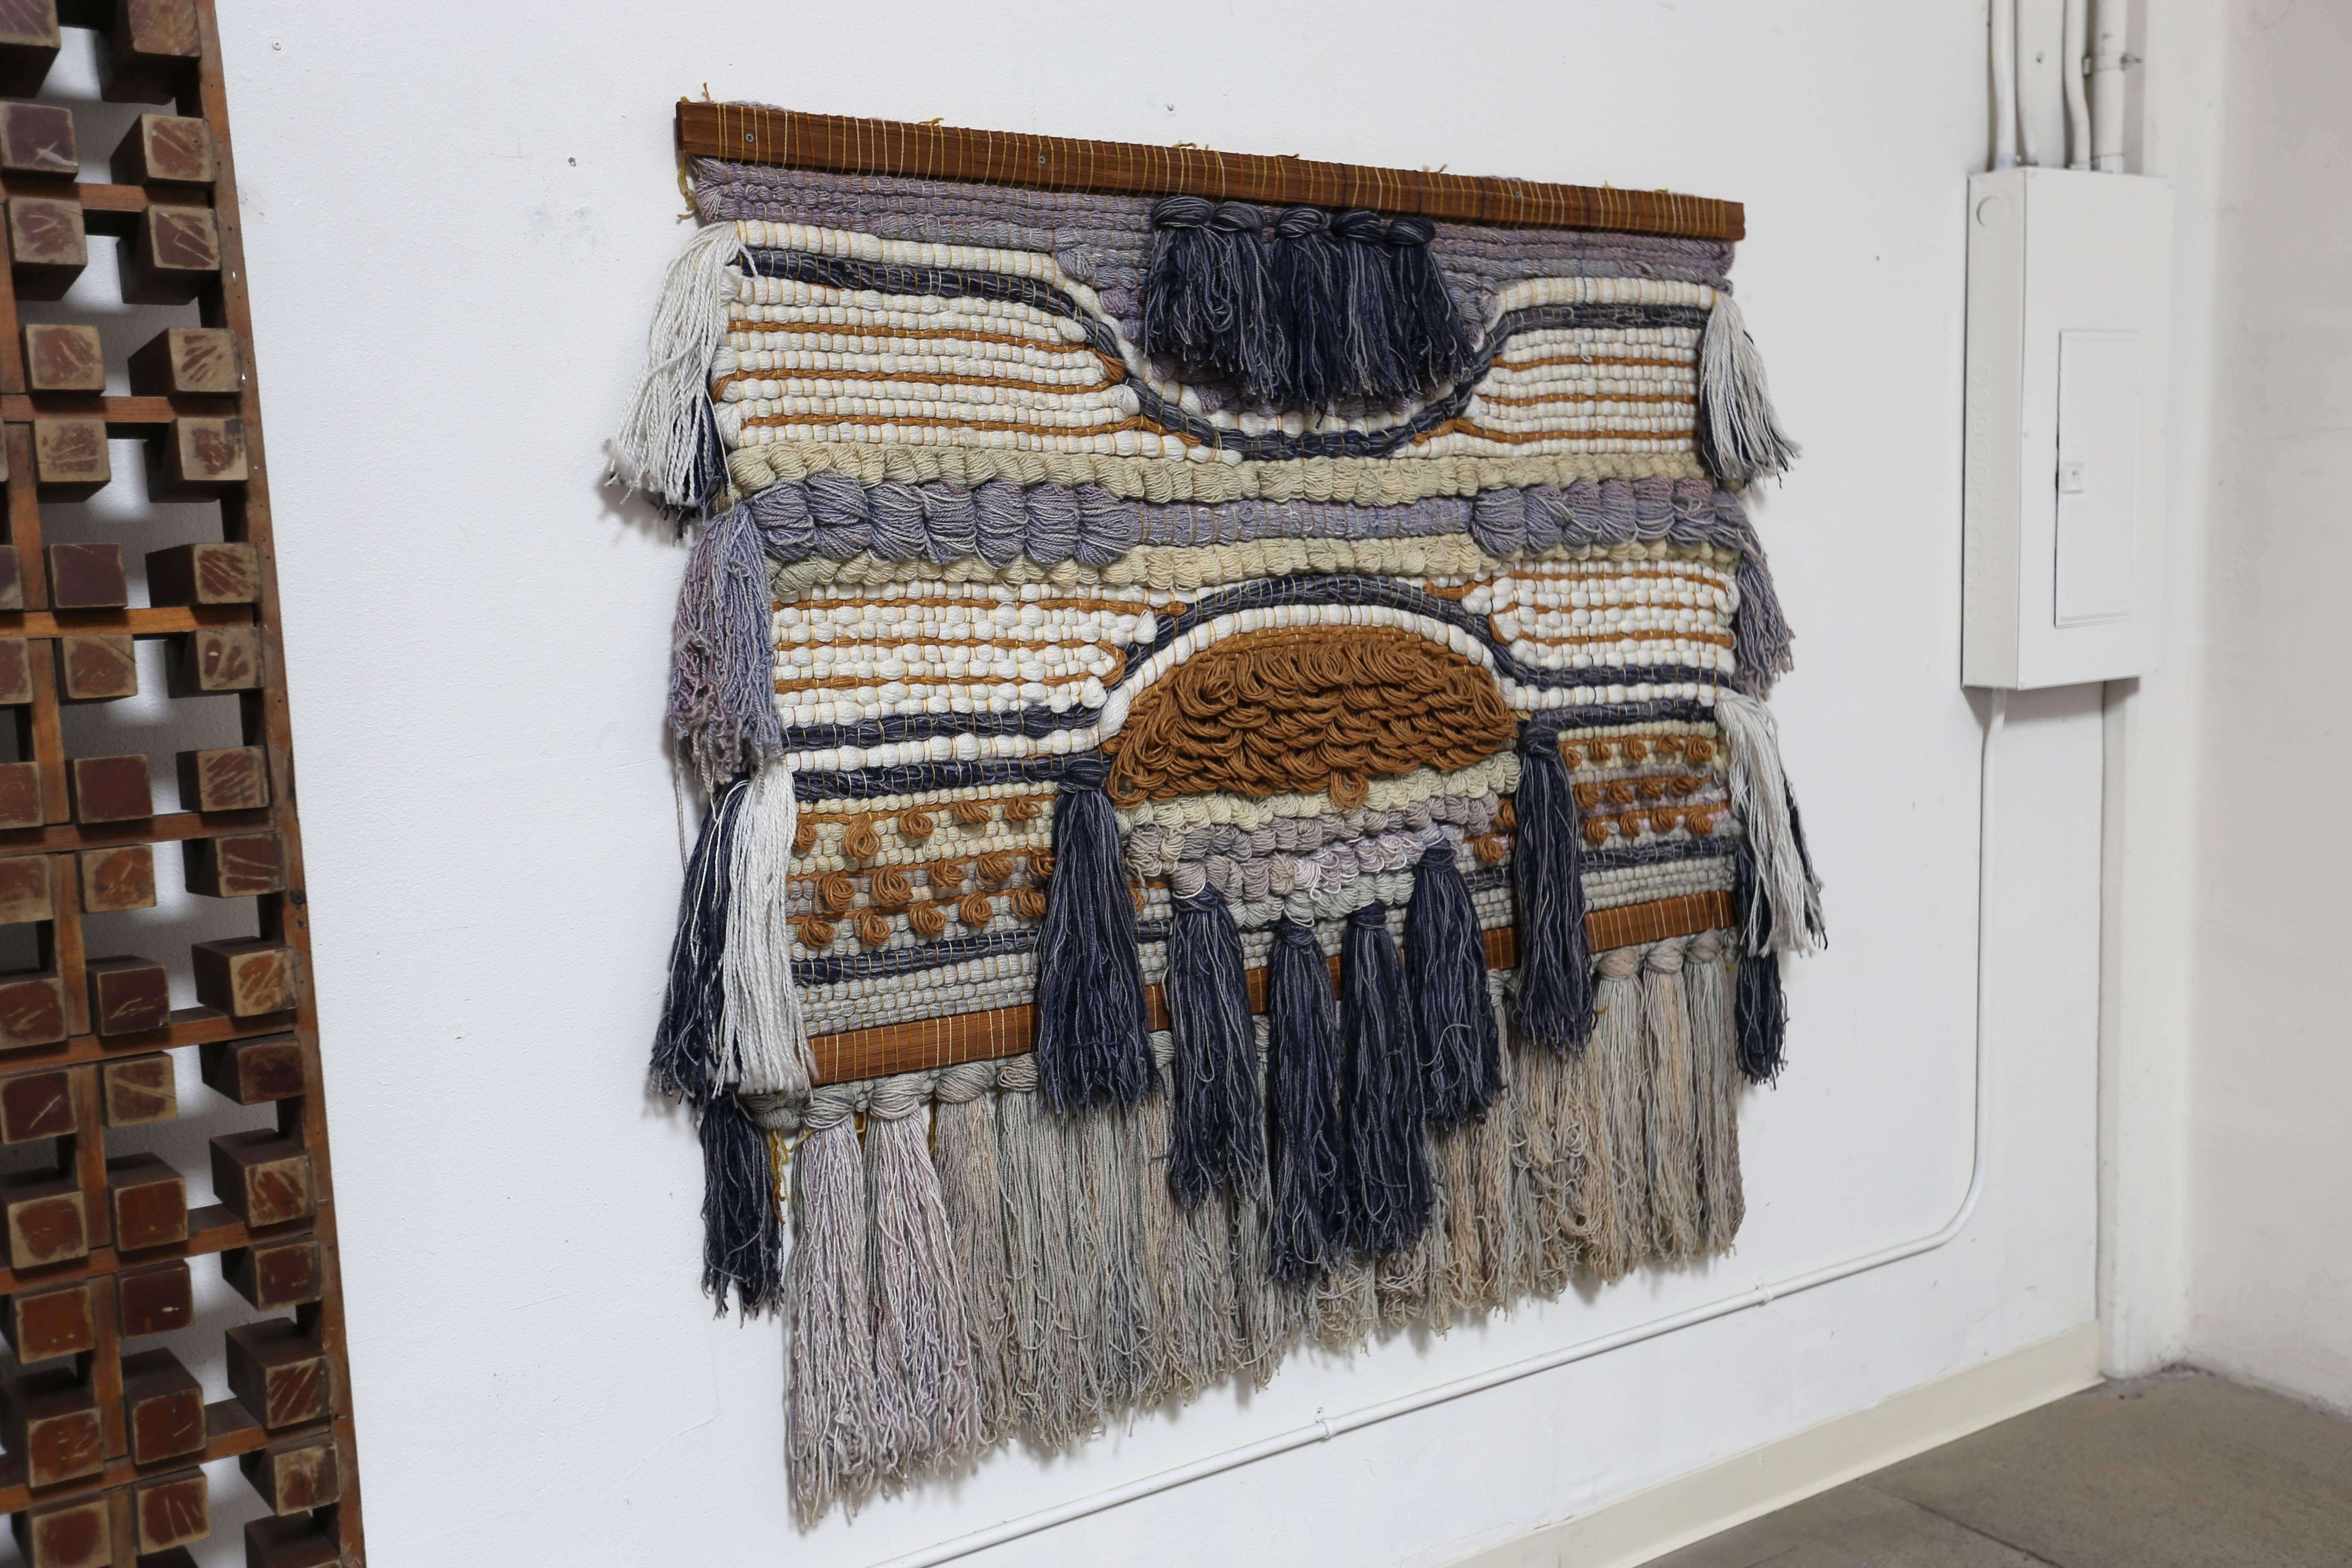 Fiber art / tapestry wall hanging by Margo Farrin O'Connor for Ted Morris and Associates.